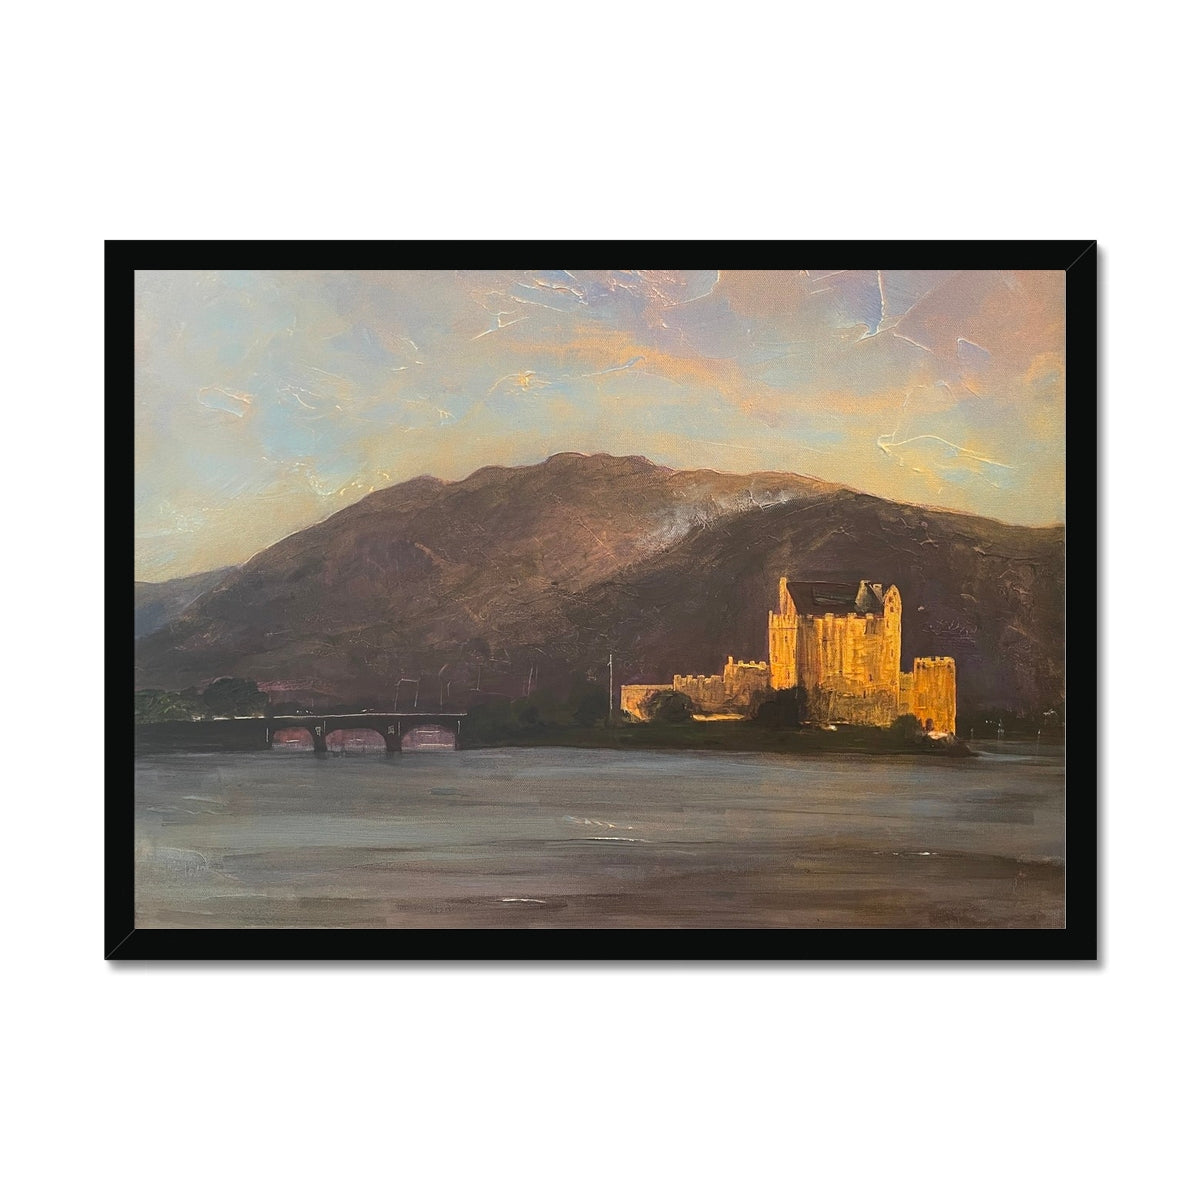 Eilean Donan Castle Painting | Framed Prints From Scotland-Framed Prints-Historic & Iconic Scotland Art Gallery-A2 Landscape-Black Frame-Paintings, Prints, Homeware, Art Gifts From Scotland By Scottish Artist Kevin Hunter